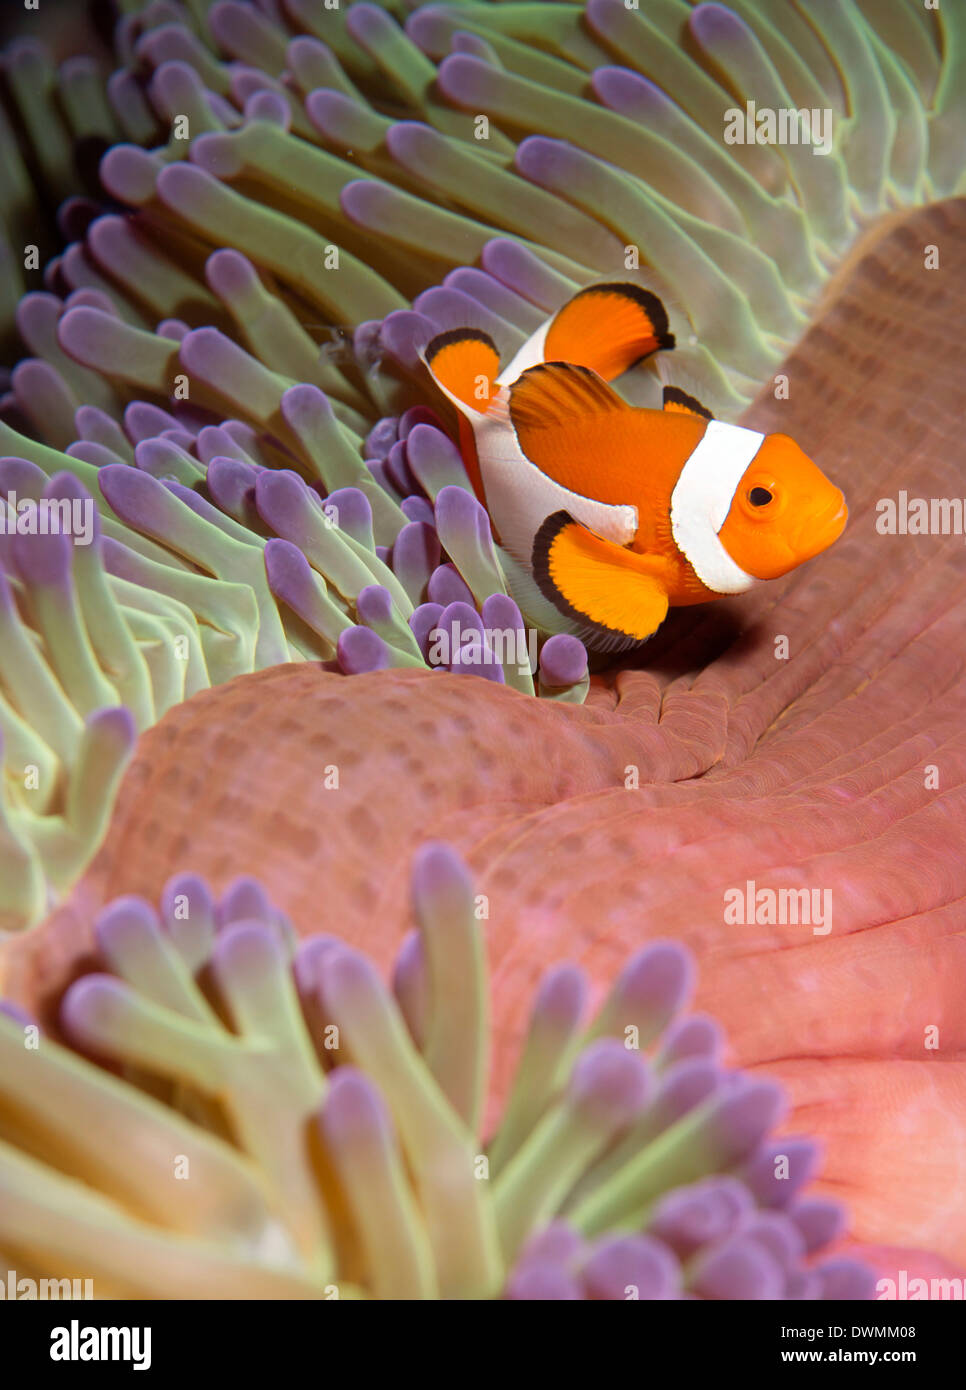 False clown anenomefish (Amphiprion ocellaris) in the tentacles of its host anenome, Celebes Sea, Sabah, Malaysia Stock Photo